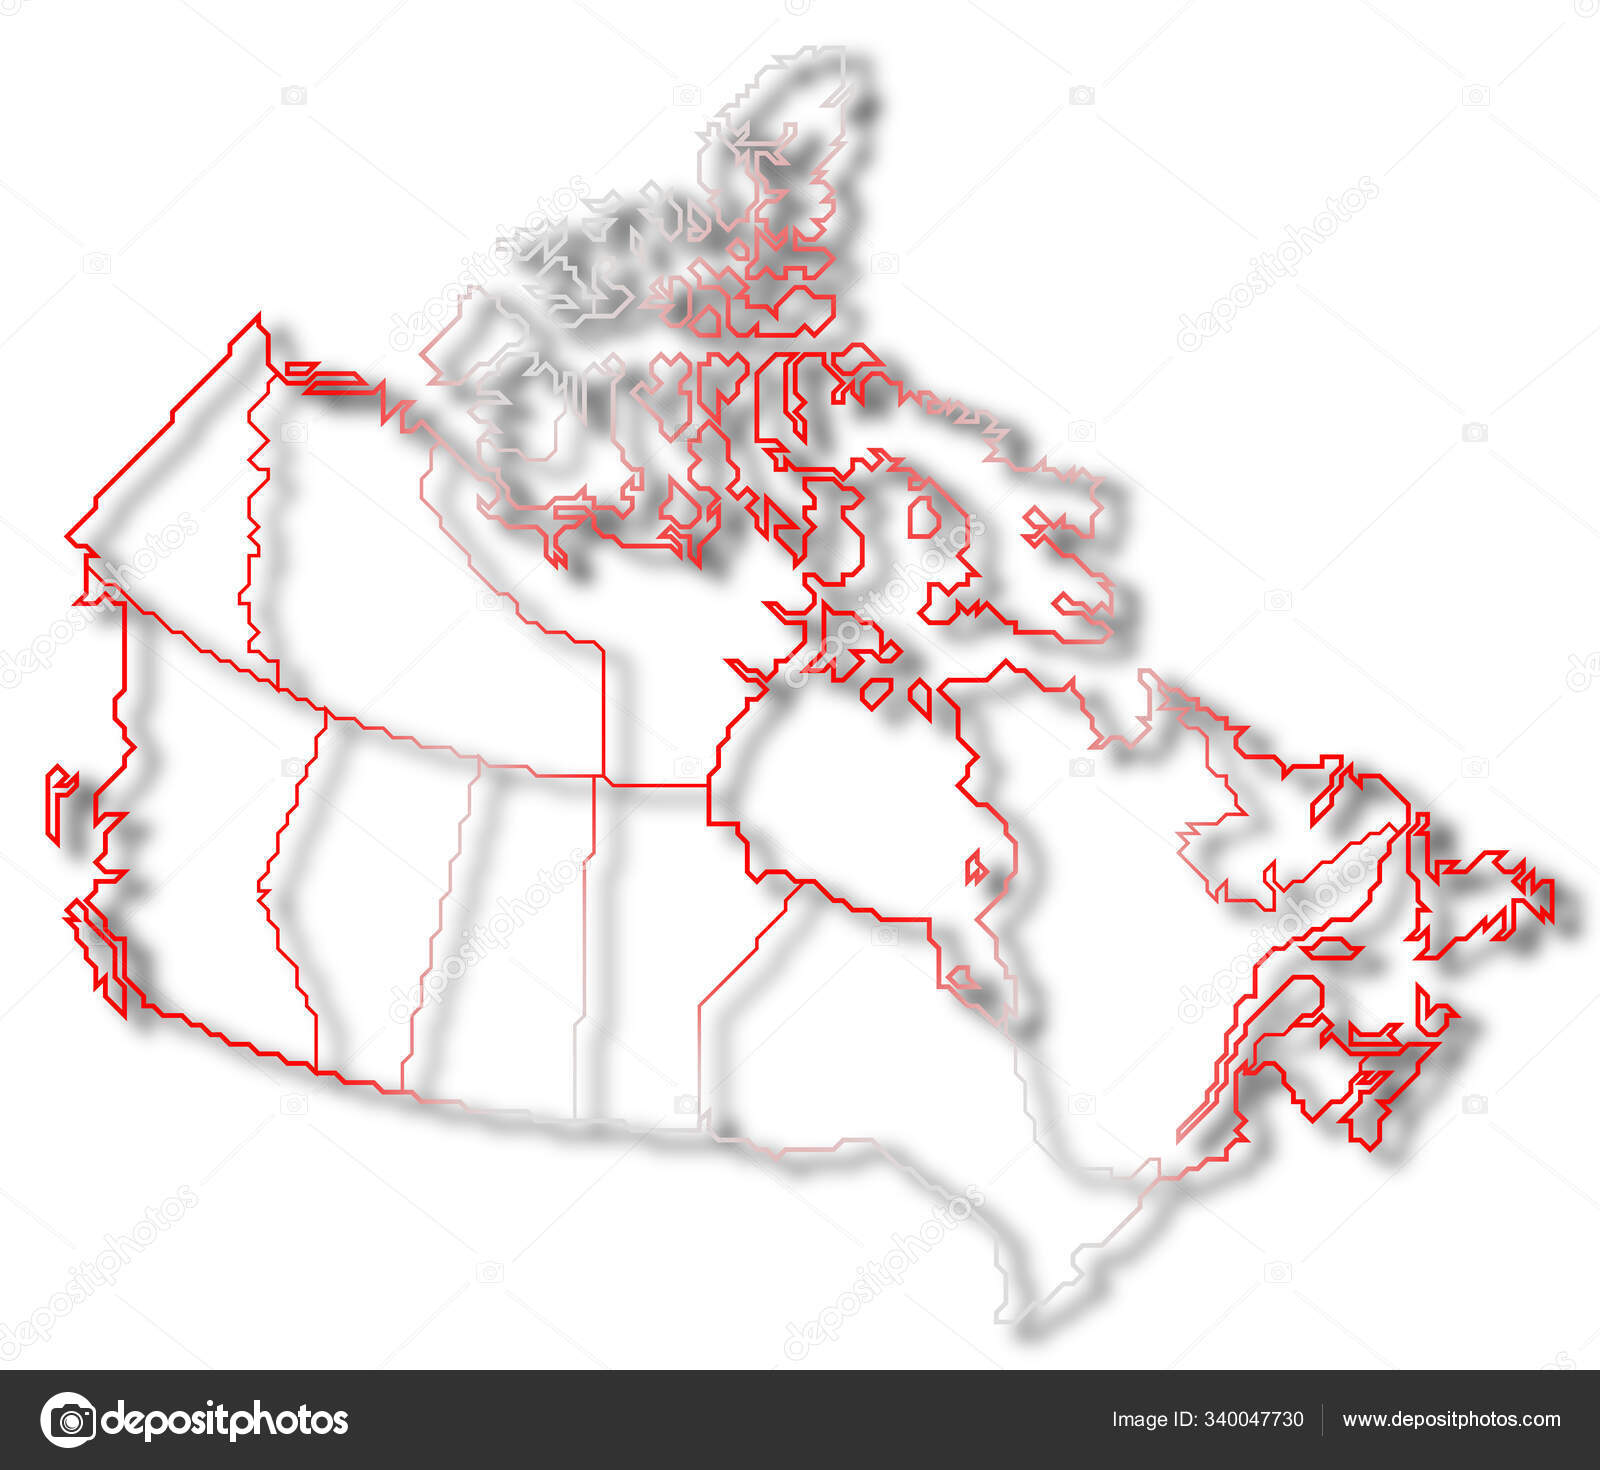 canada political map black and white